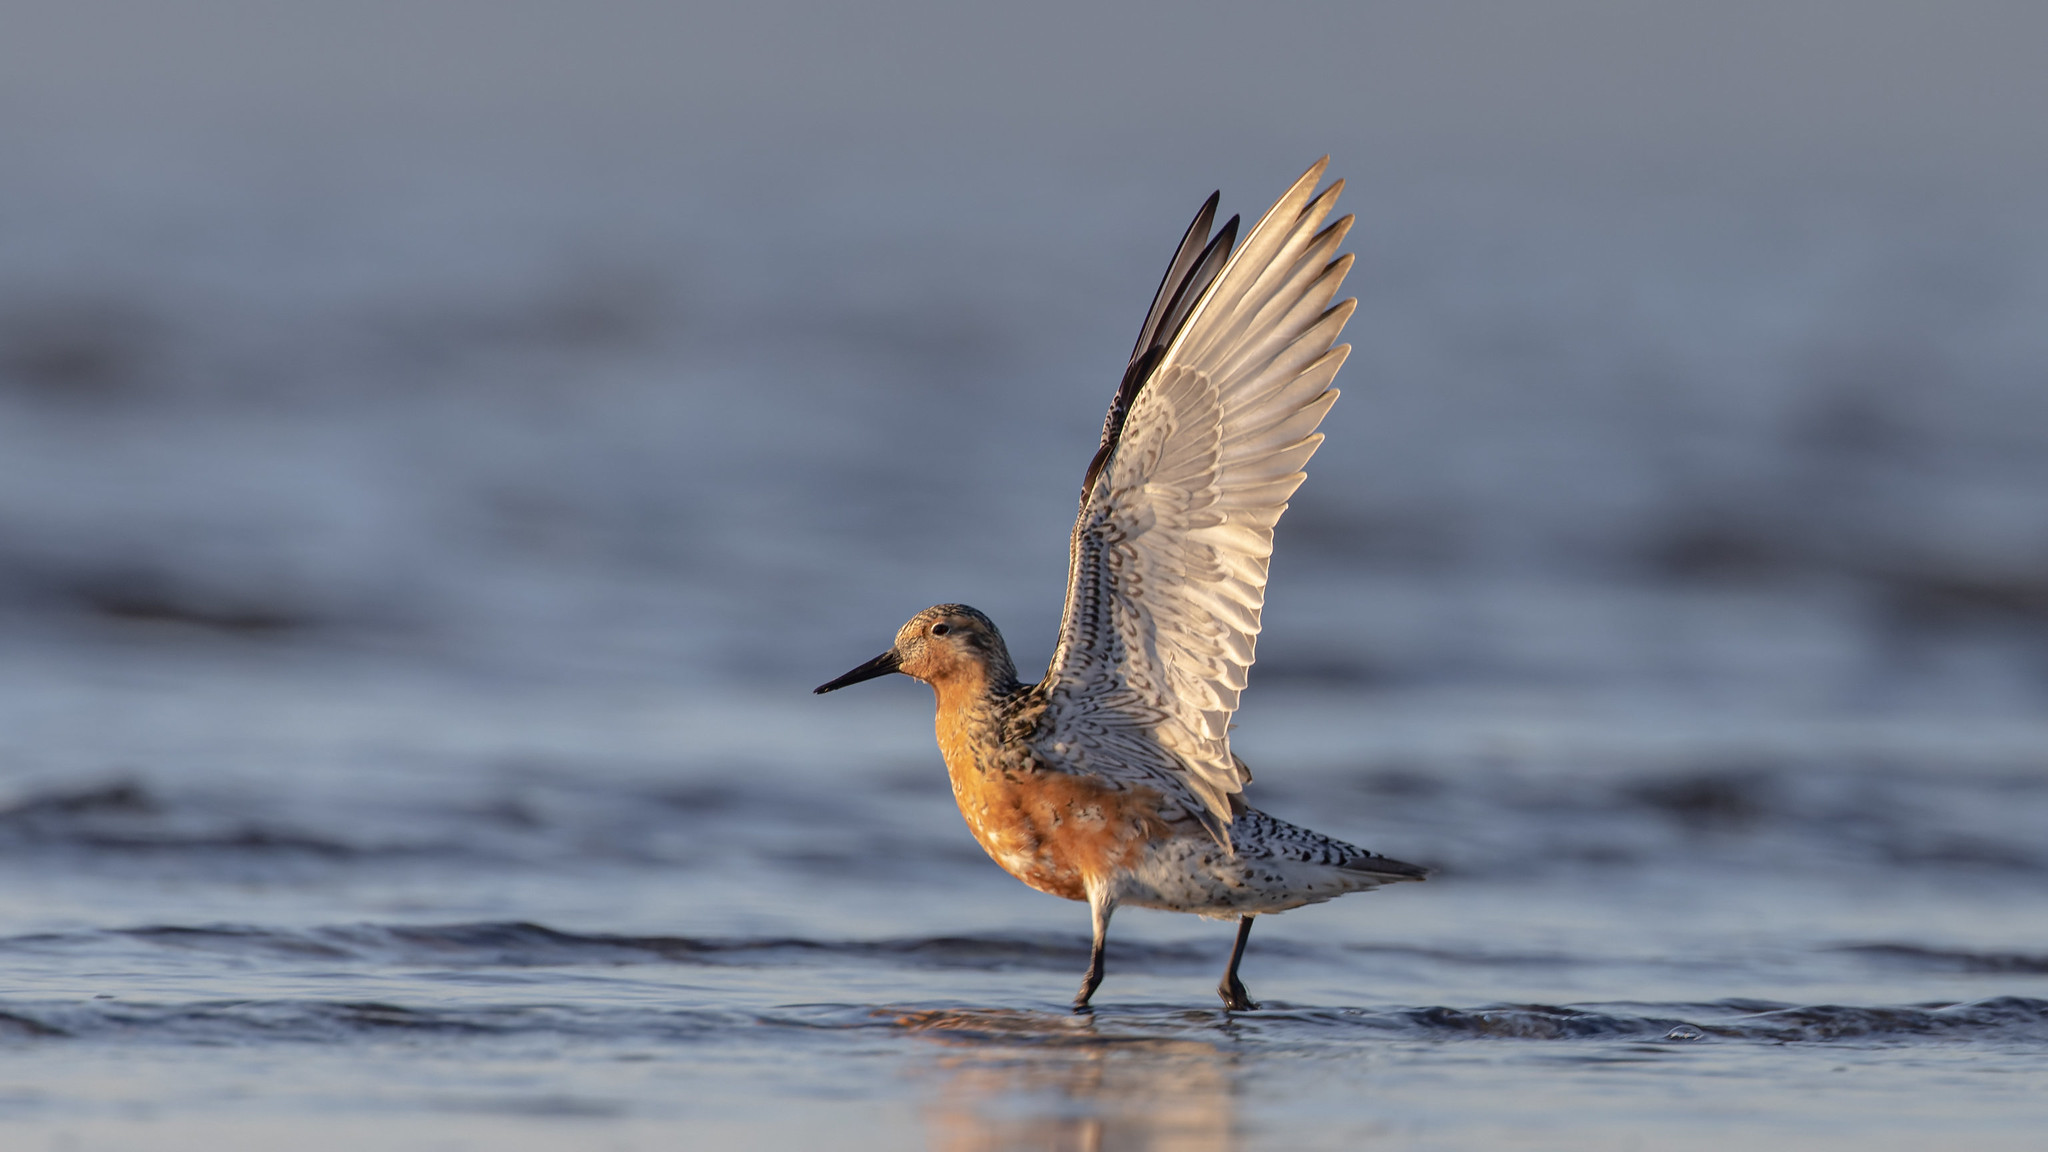 Red knot stretching its wings. Photo: Eric Ellingson, Creative Commons